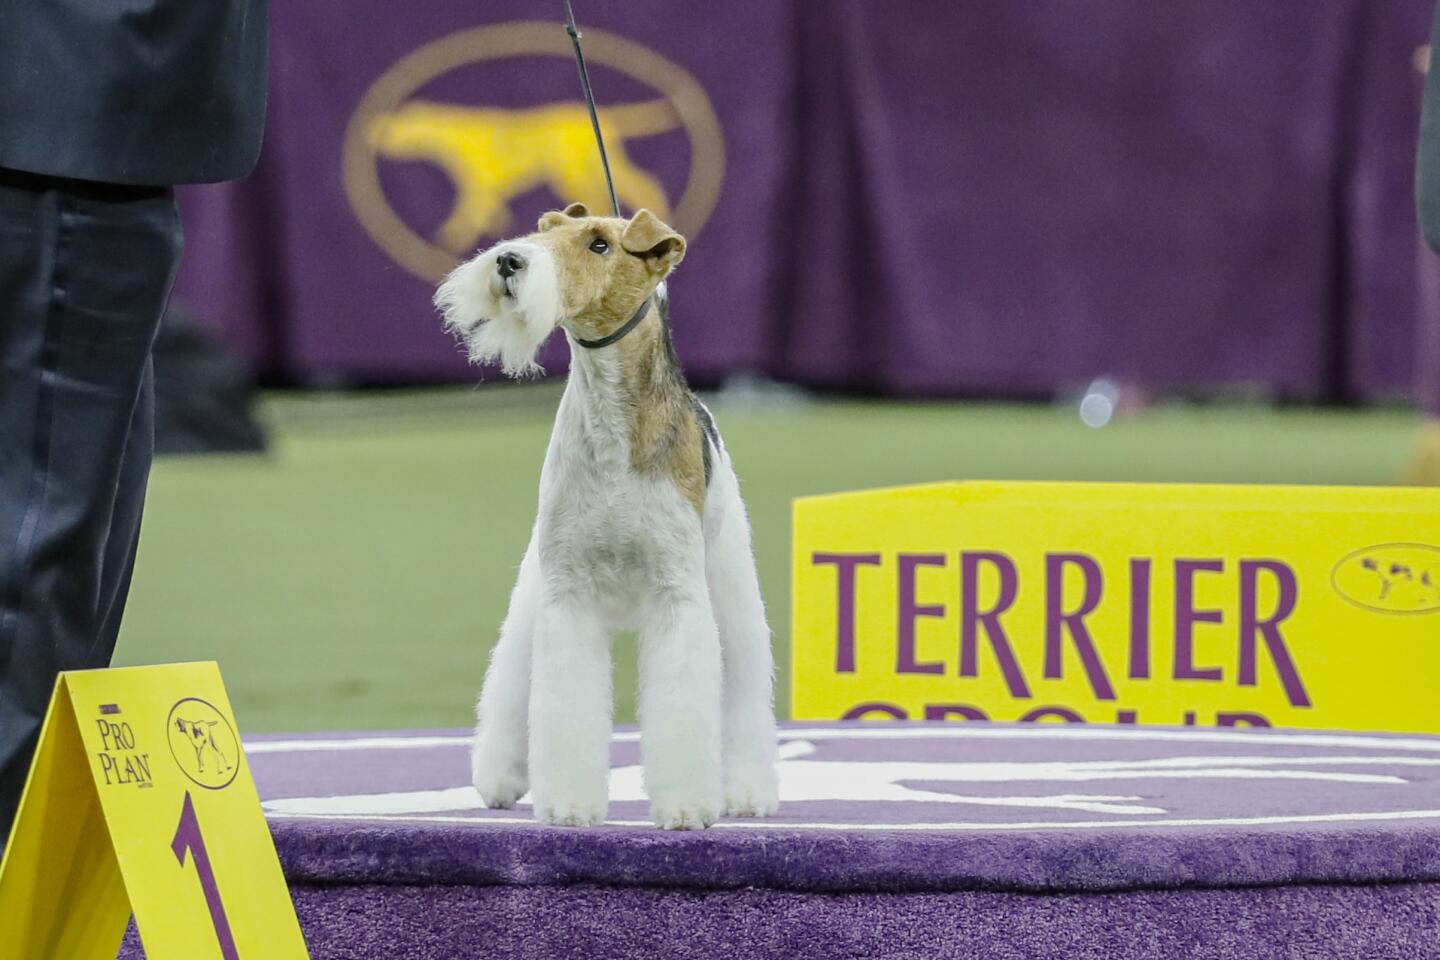 Also in the final grouping was Vinny the wire fox terrier.